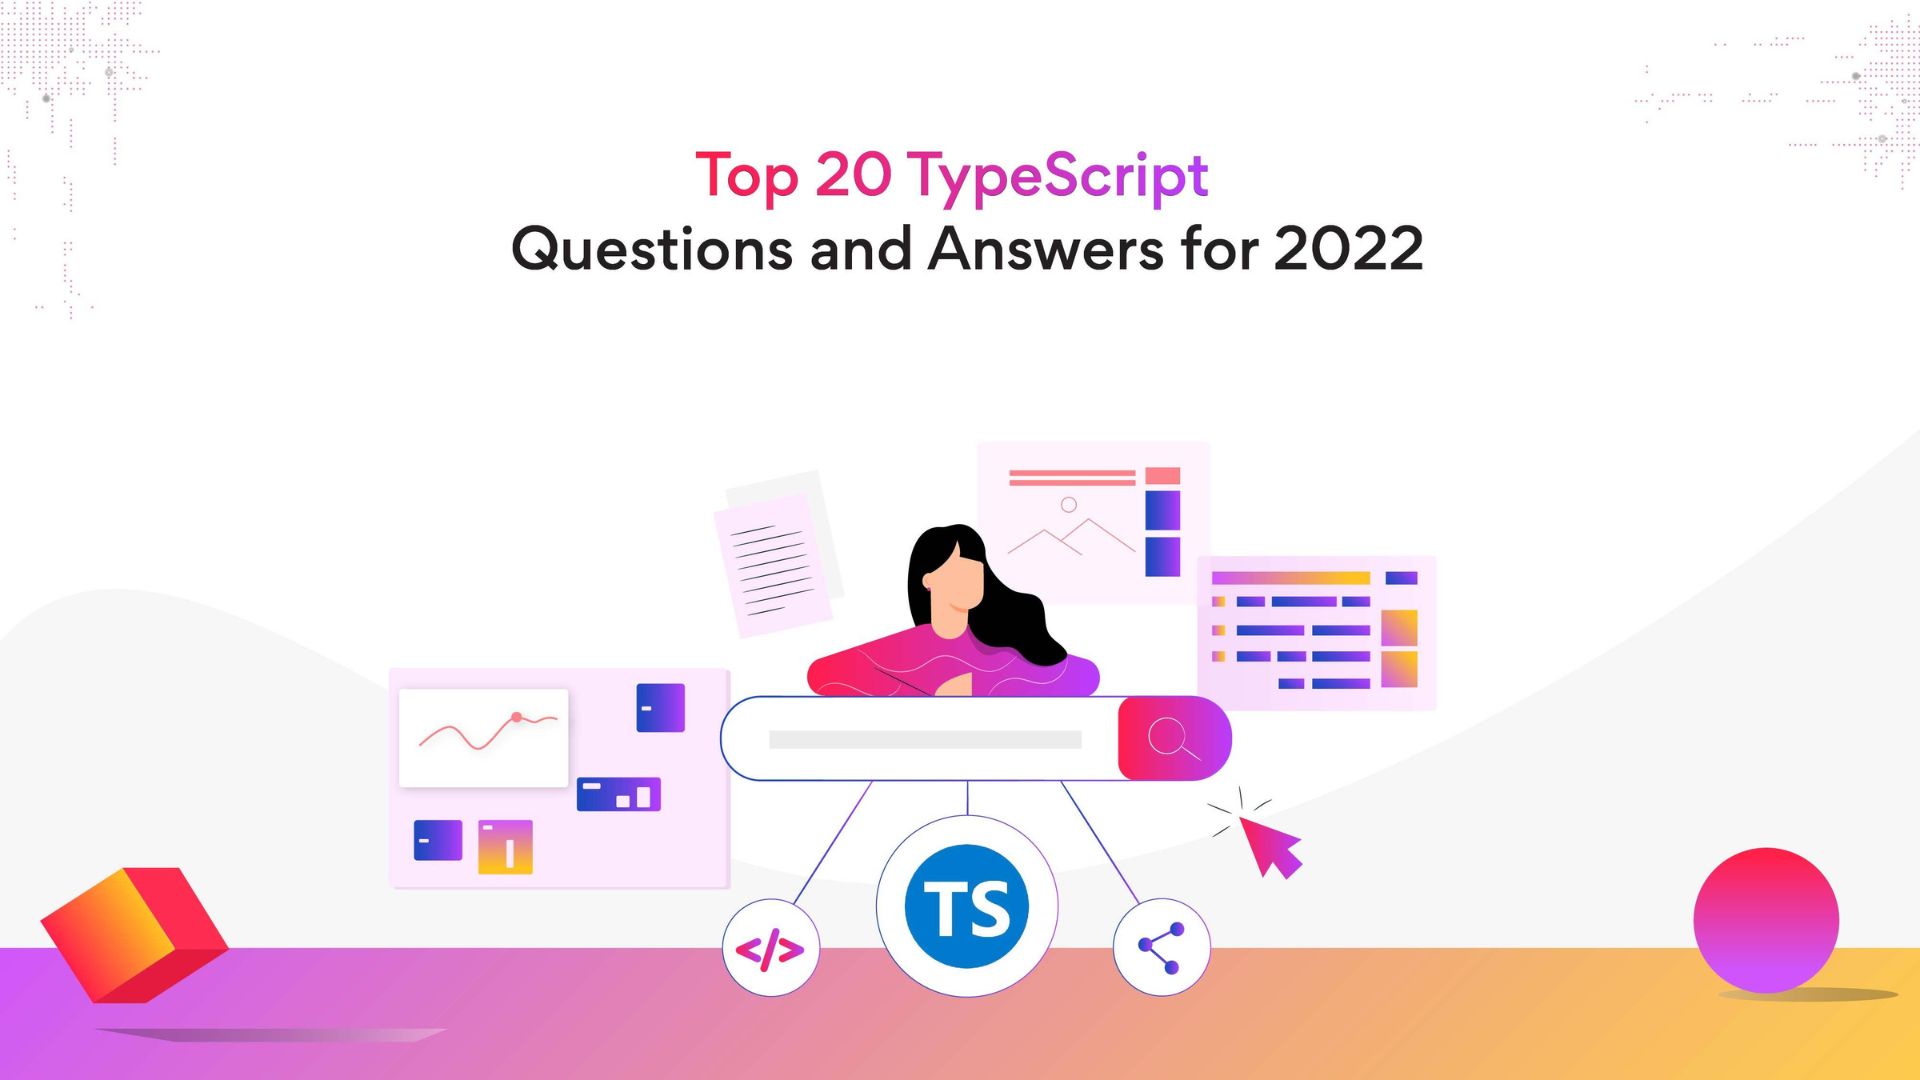 Top TypeScript Questions and Answers for 2022